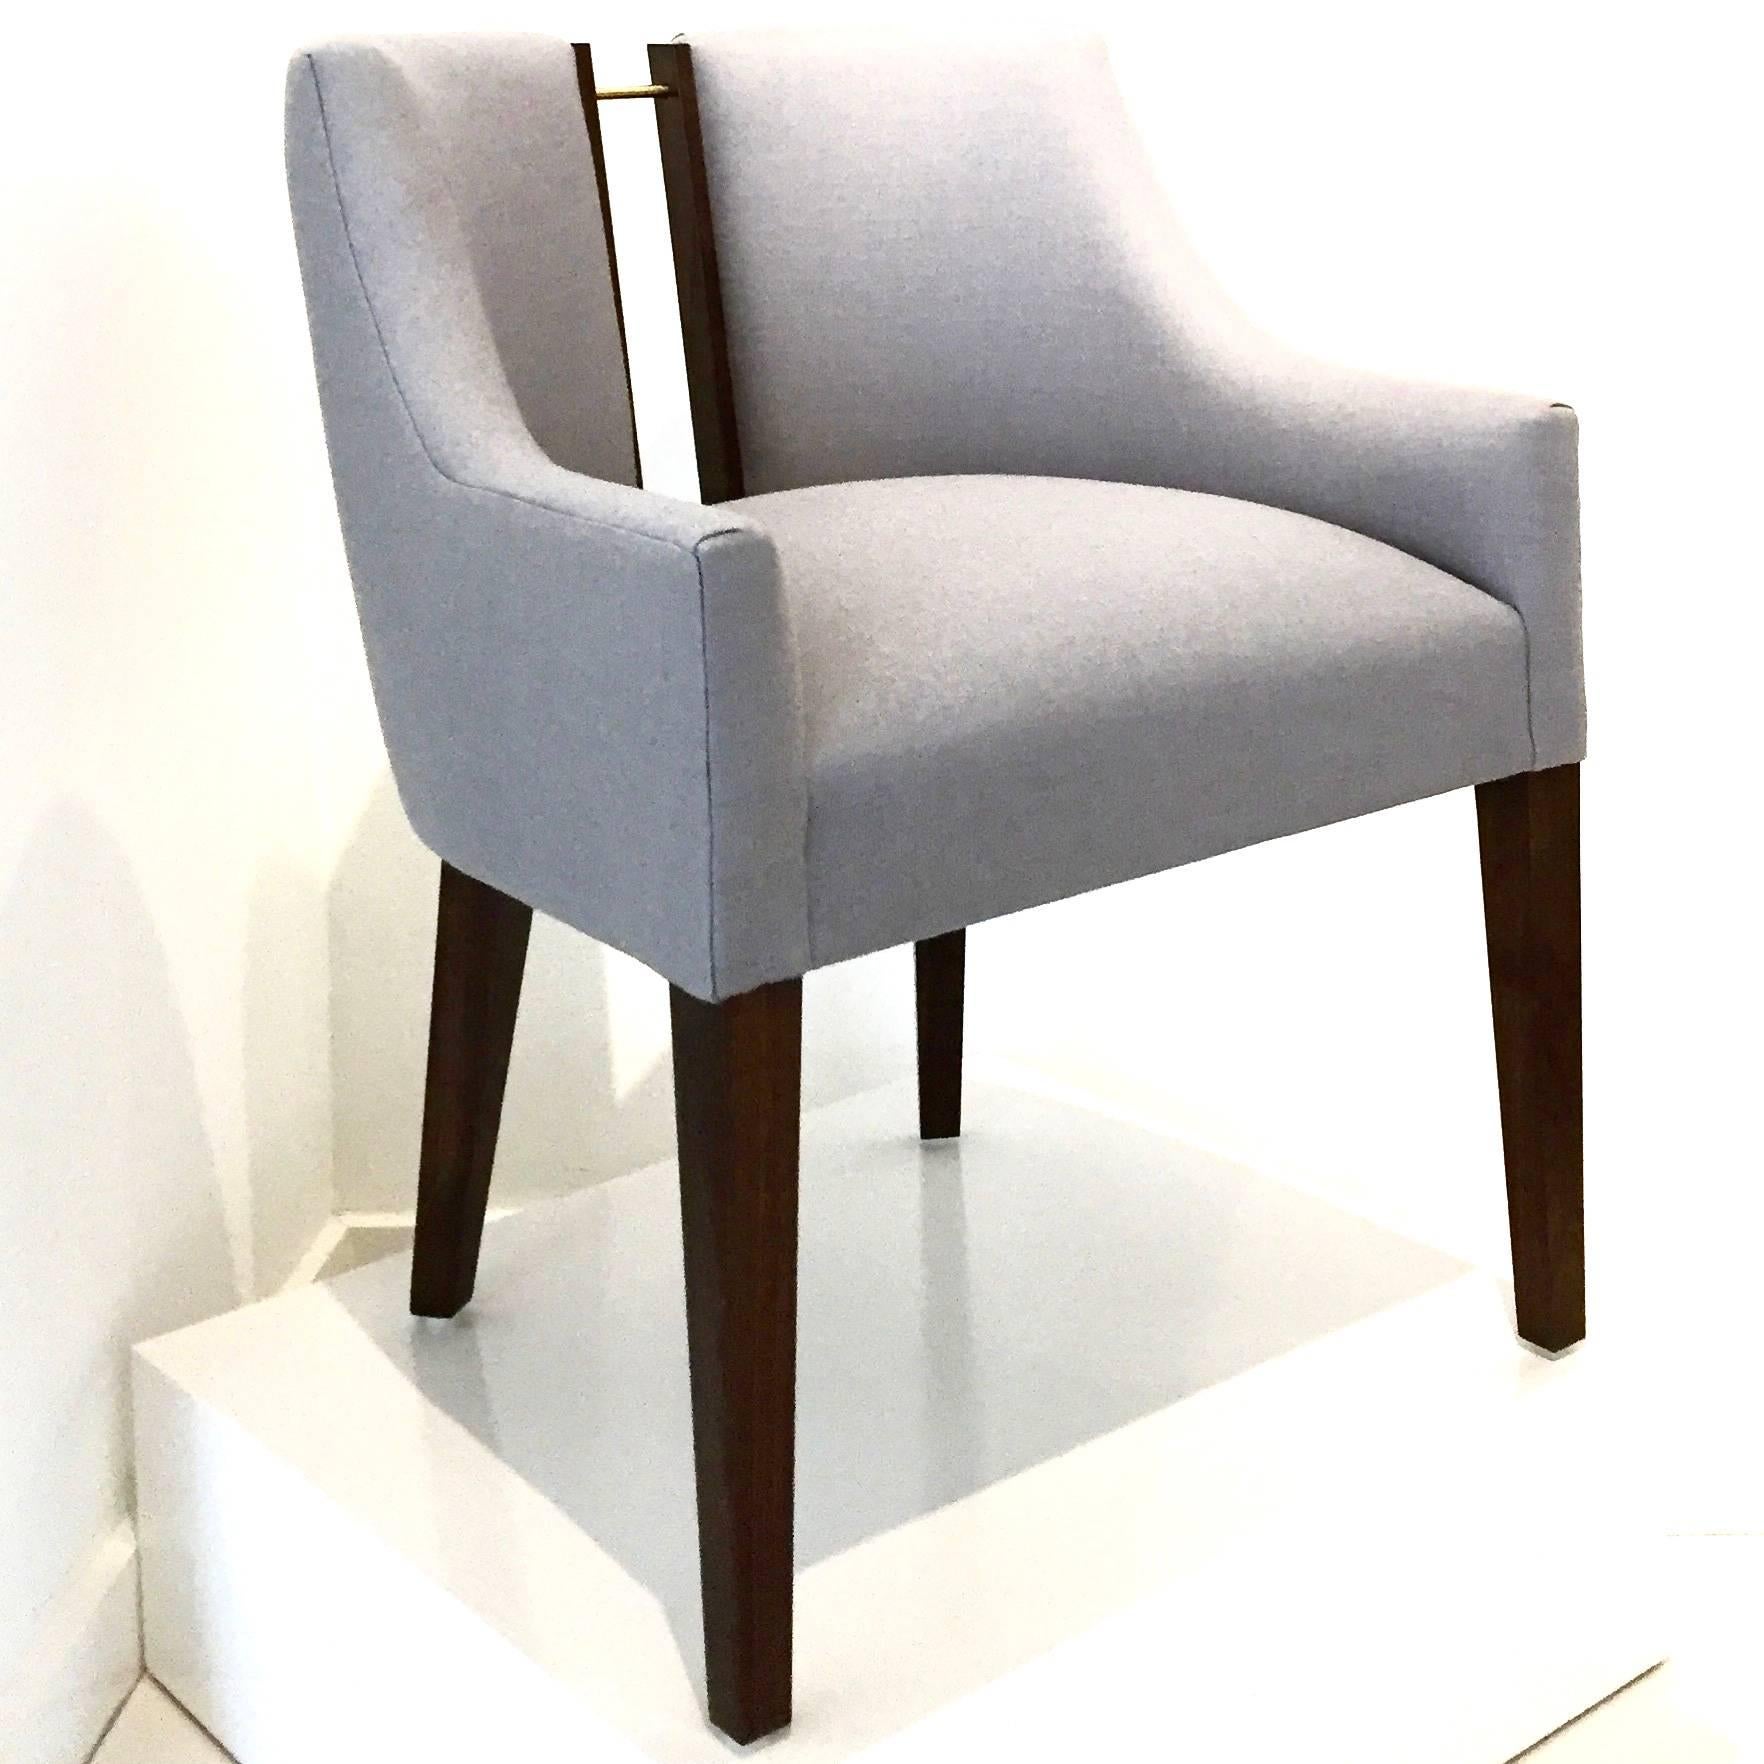 American Declan Dining Chair For Sale